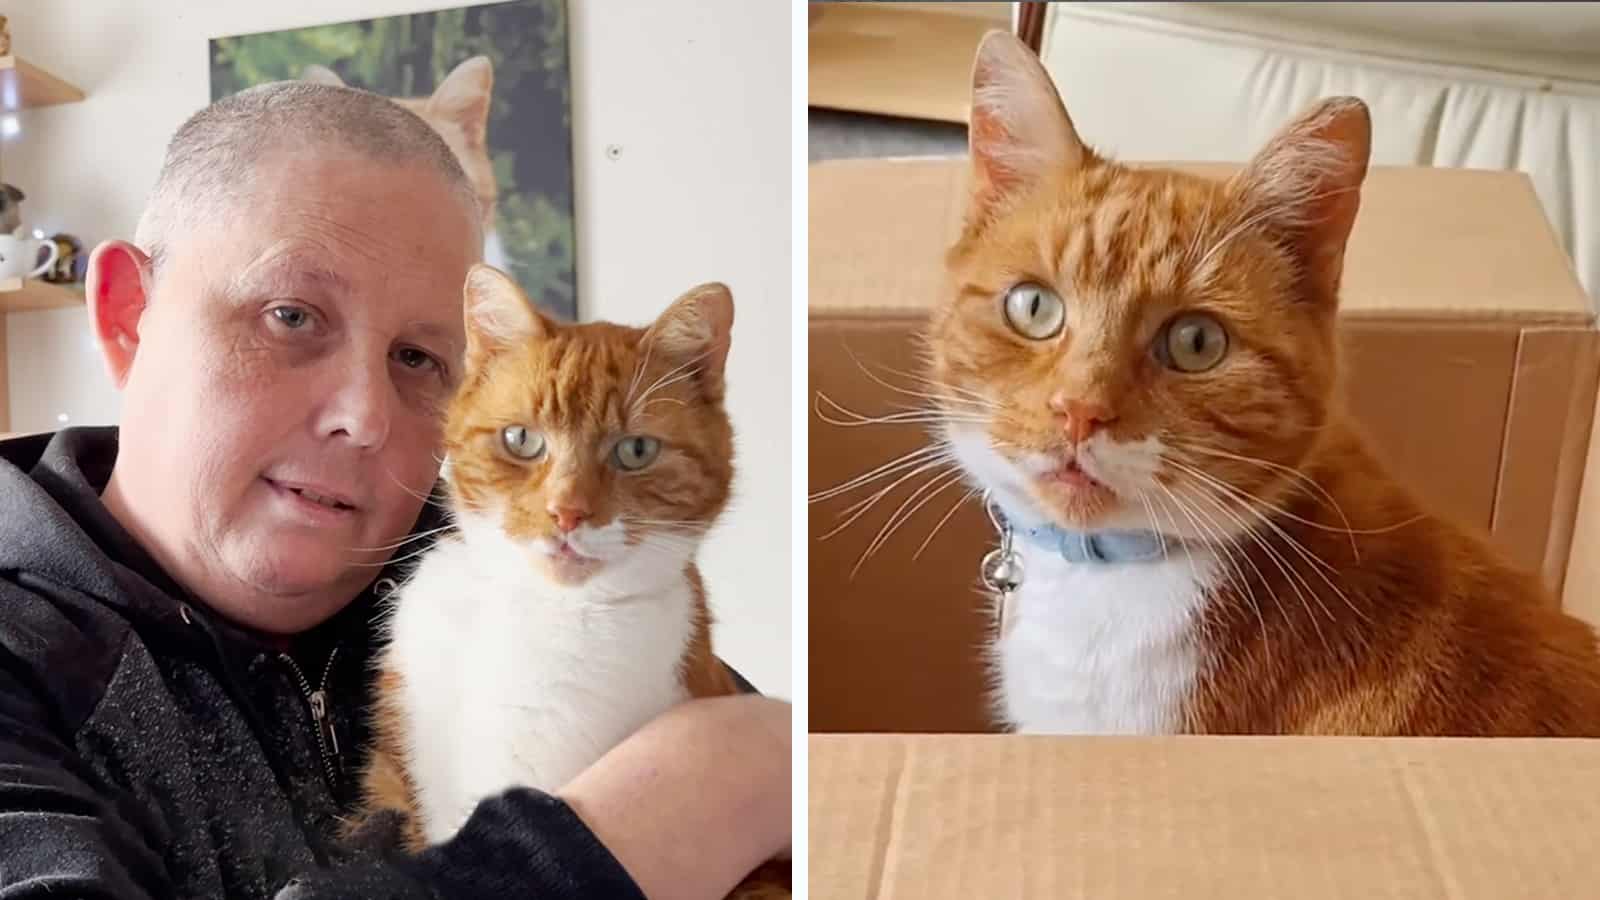 This Sweet Ginger Cat Will Melt Even The Coldest Heart